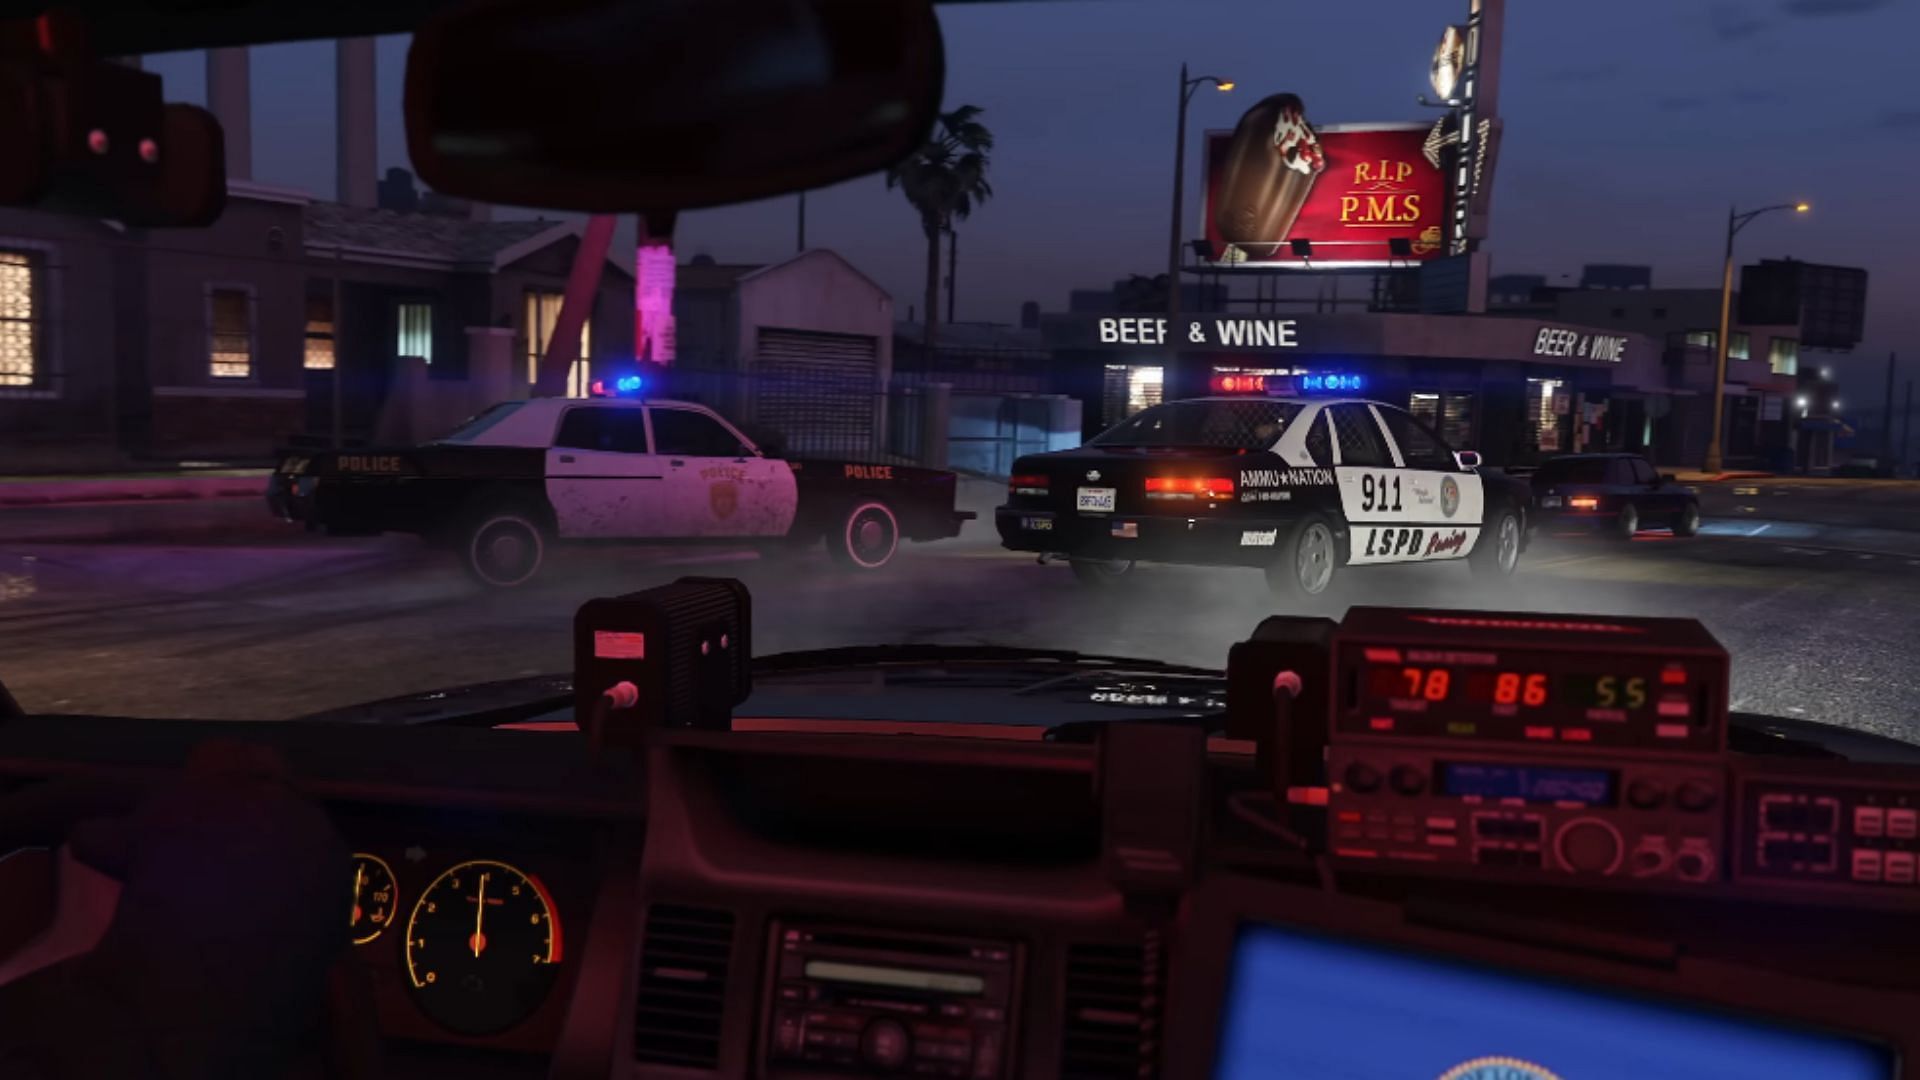 Police Impaler in action on the right (Image via Rockstar Games)